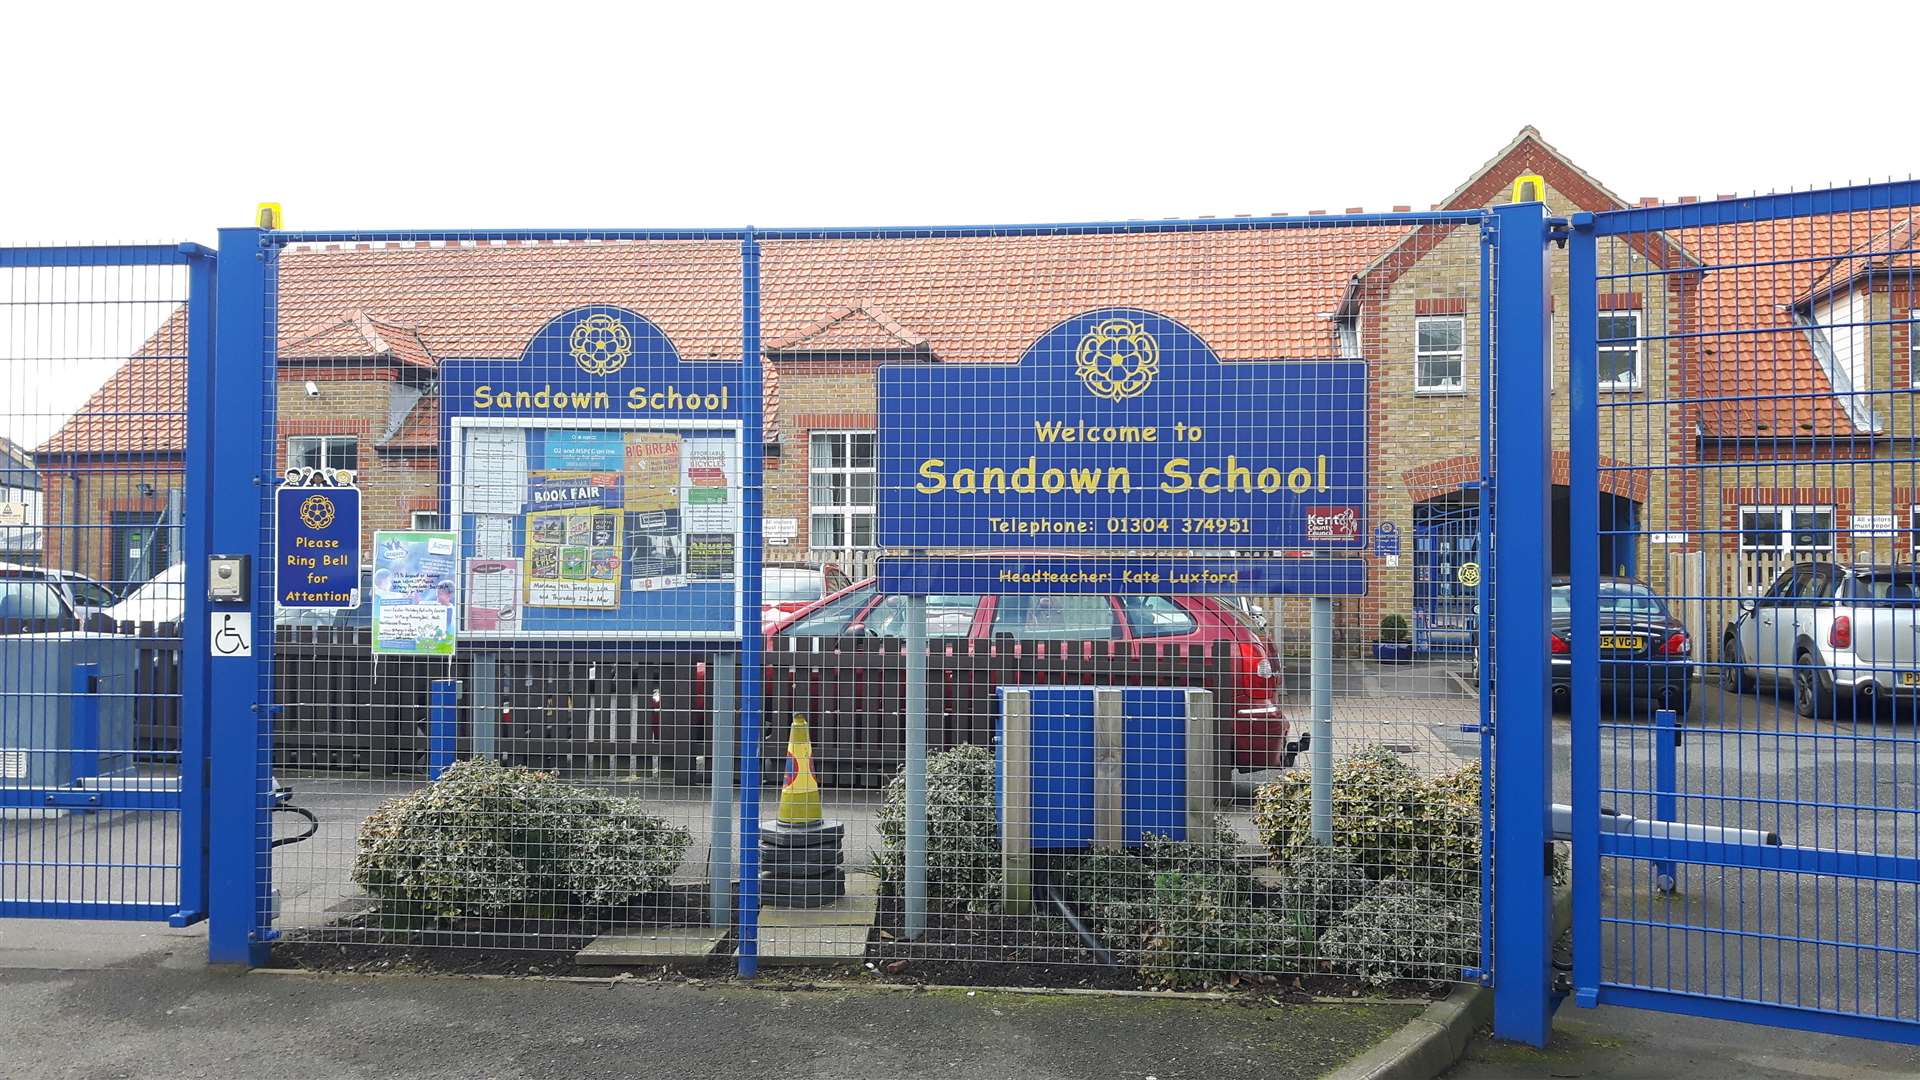 Sandown Primary School is among the seven schools in Deal which could be merged into a multi-academy trust.